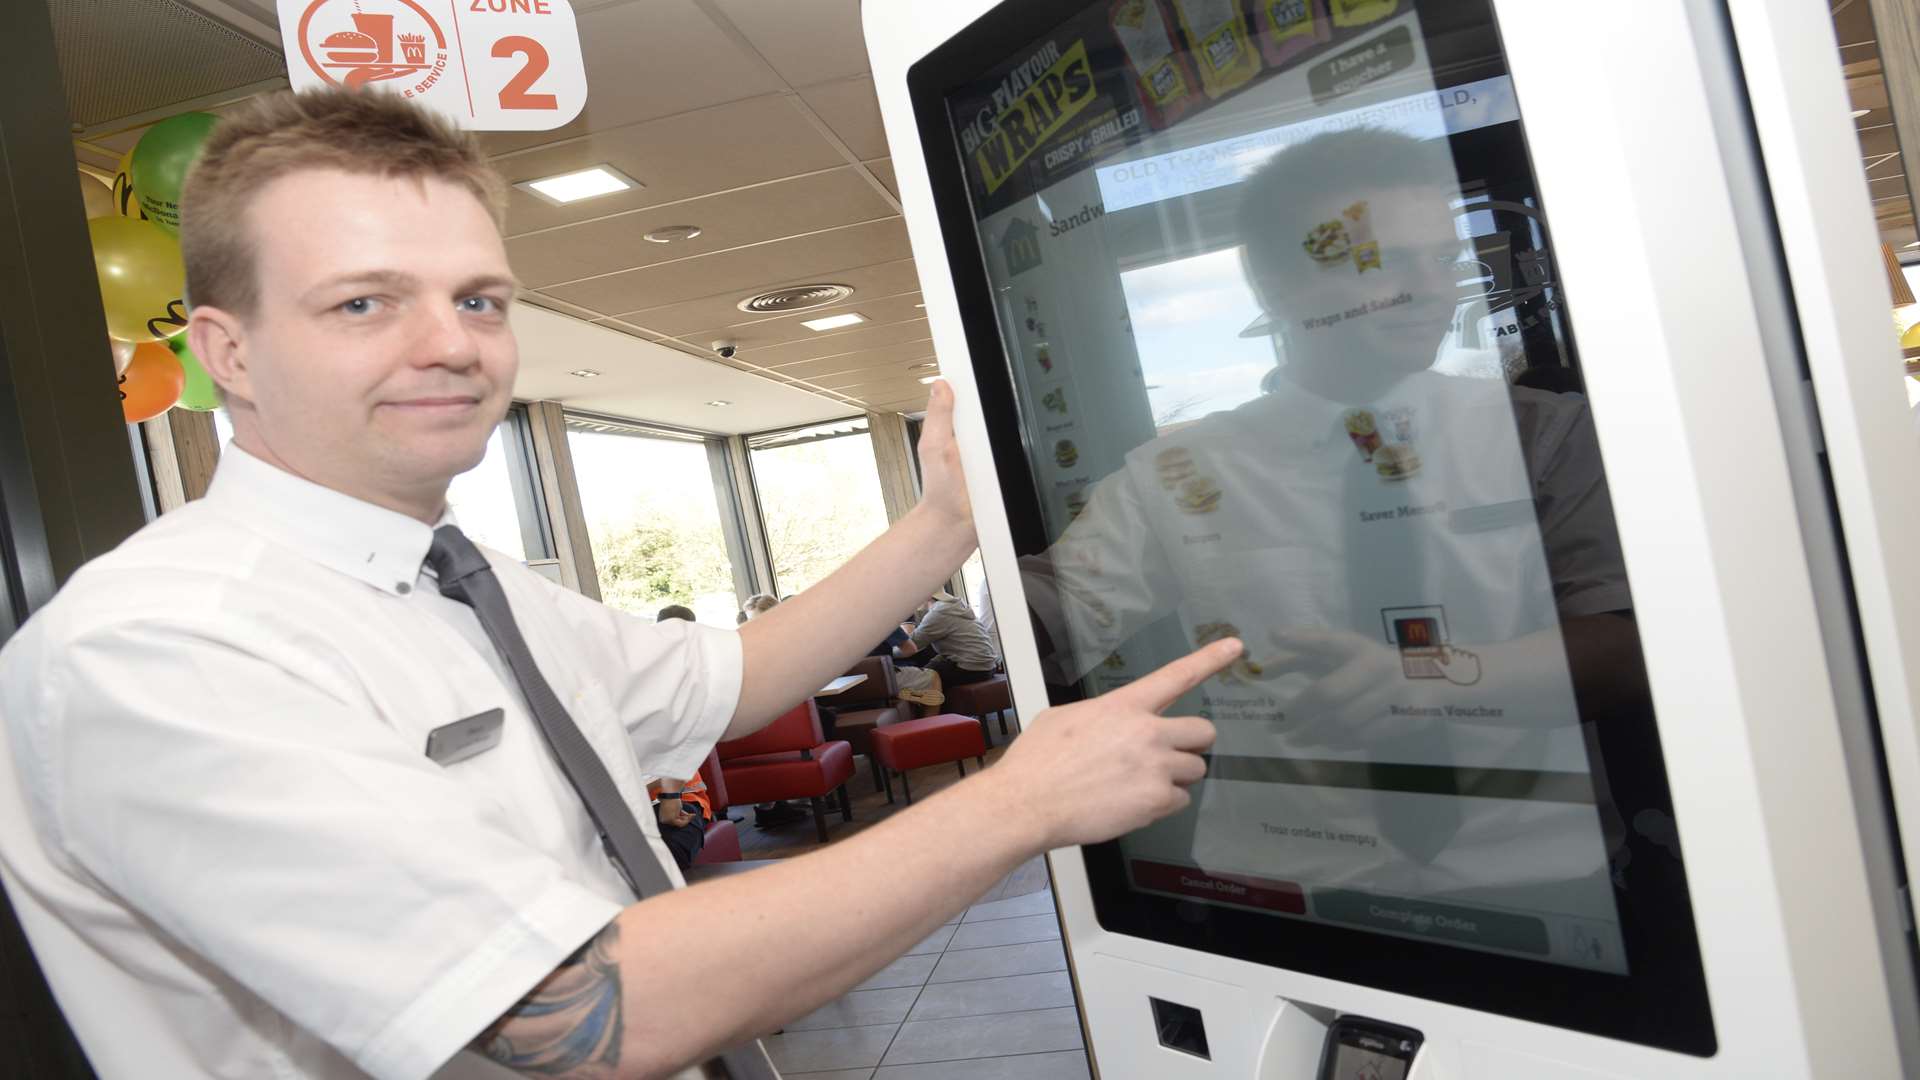 Manager Steve King demonstrates the new touch screen order taker at the refurbished Chestfield McDonald's.